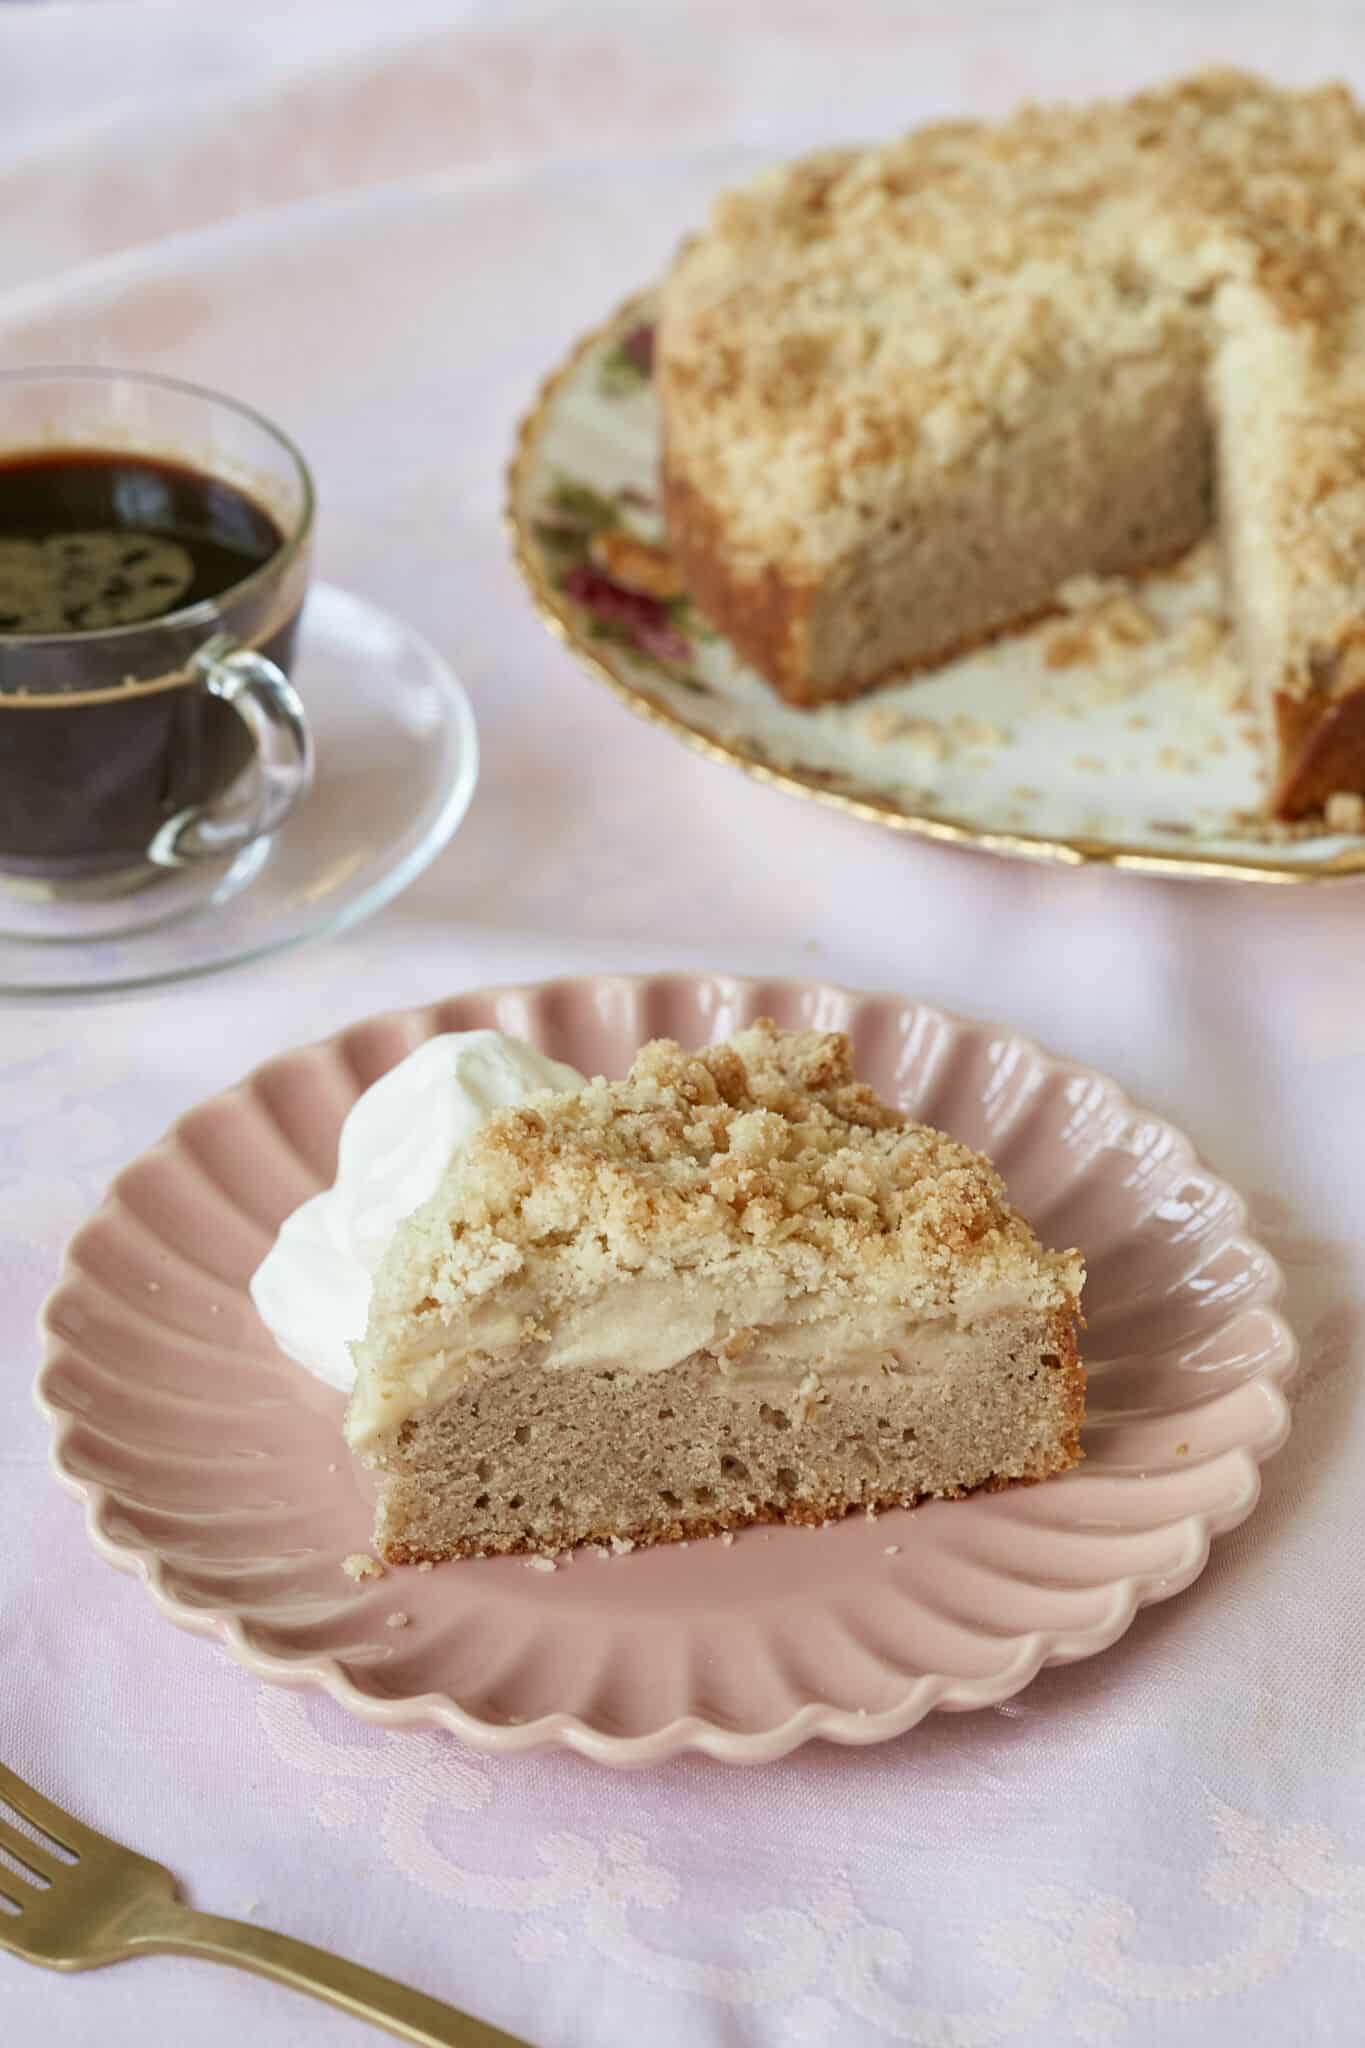 A close-up shot at a slice of Irish Apple Cake served on a dessert plate in the front shows the moist soft cake layer, the sweet apple layer and the crumbly topping. The rest of the cake is on the big platter and a cup of coffee is next to it.